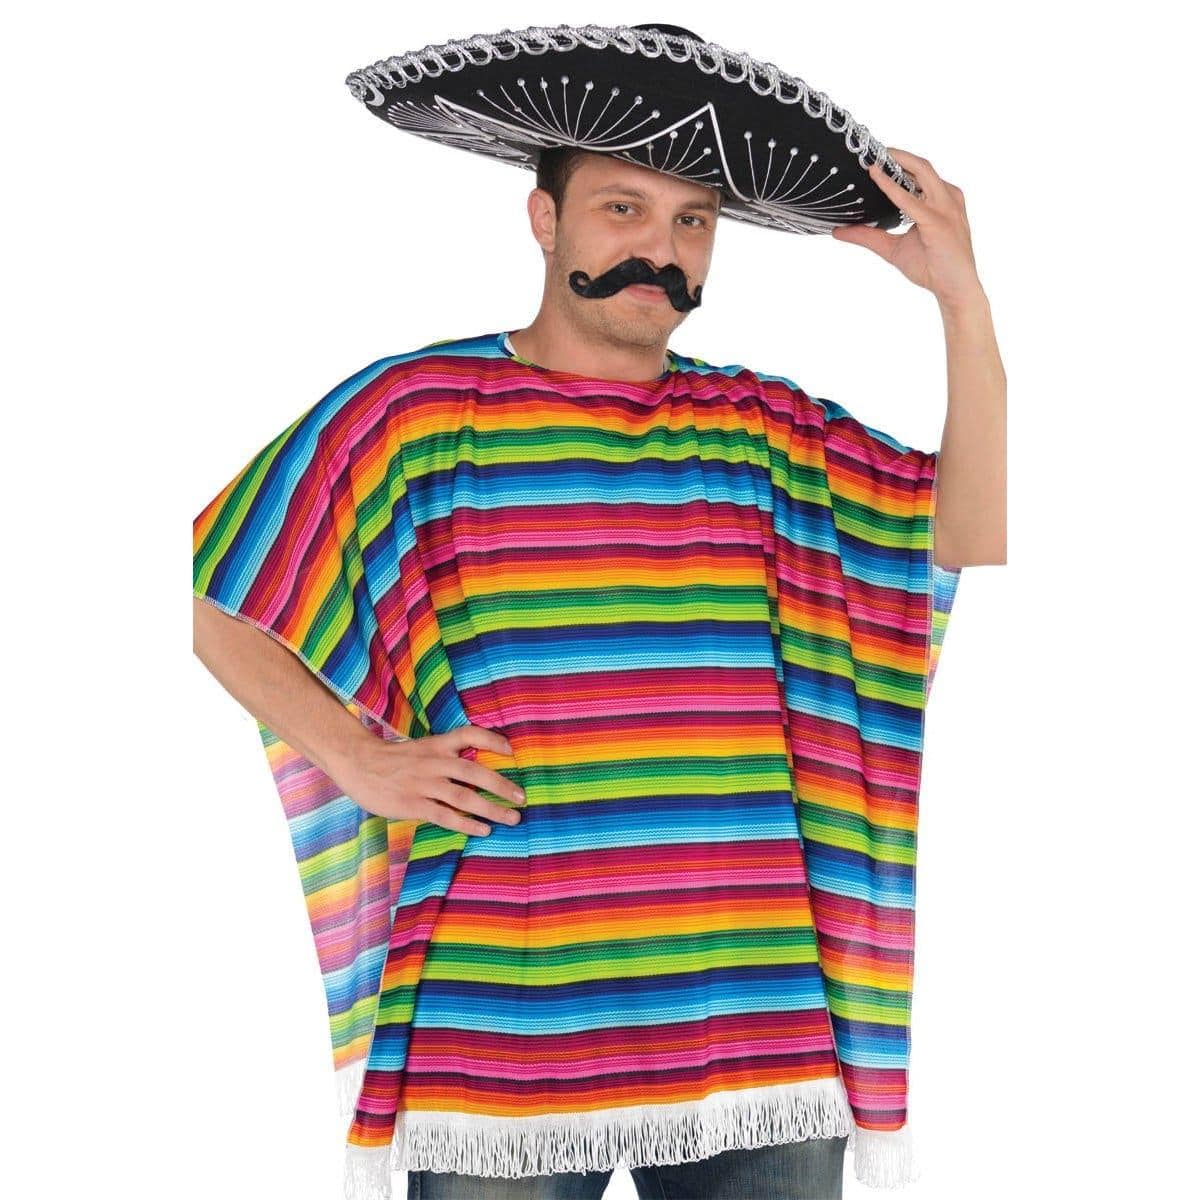 Buy Costume Accessories Multicolored serape for adults sold at Party Expert